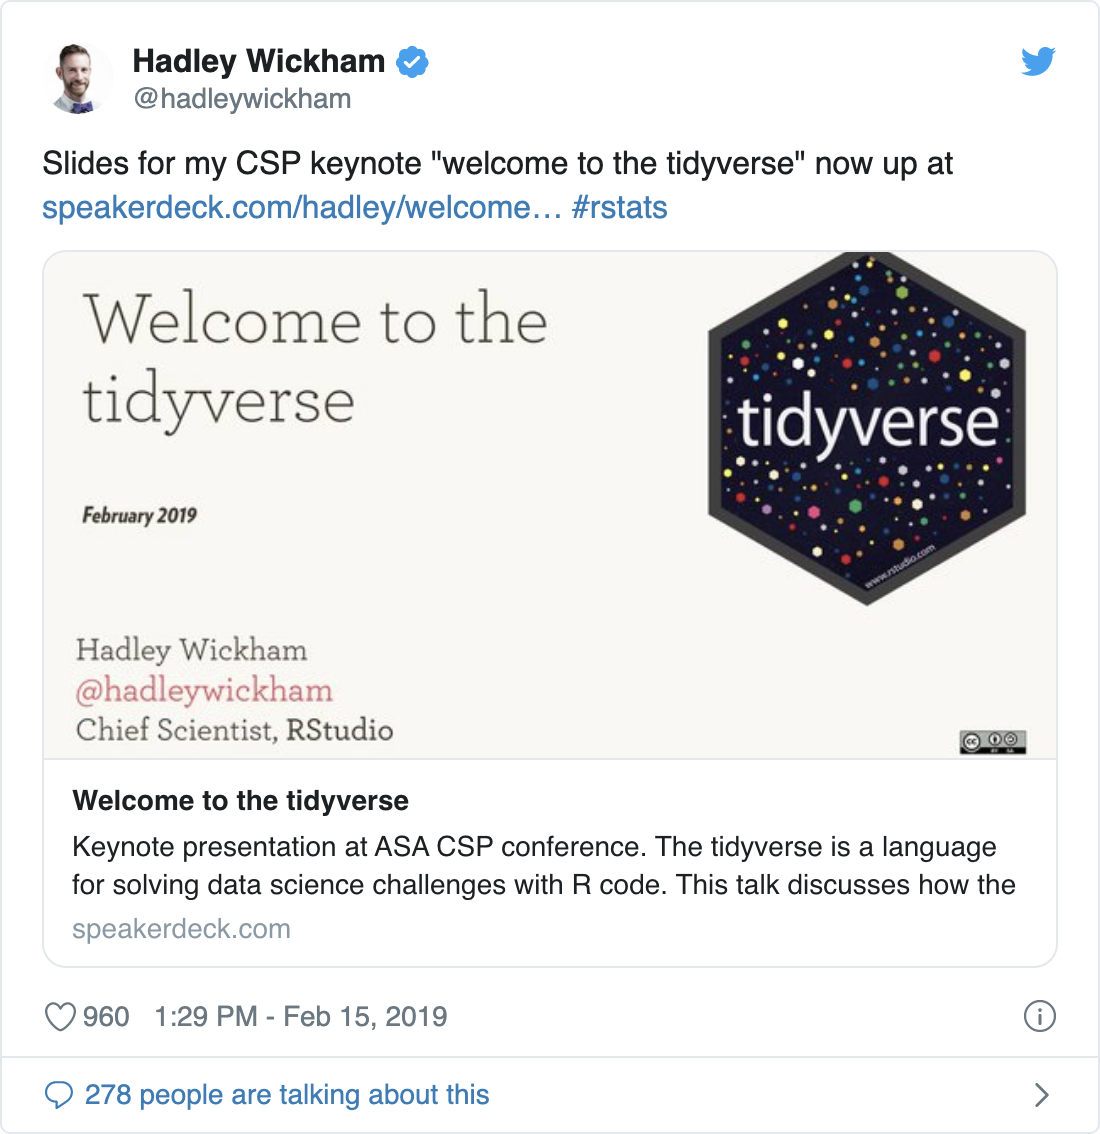 Tweet from @hadleywickham sharing a link to slides, with complete metadata. The preview image from the link shows the first slide.